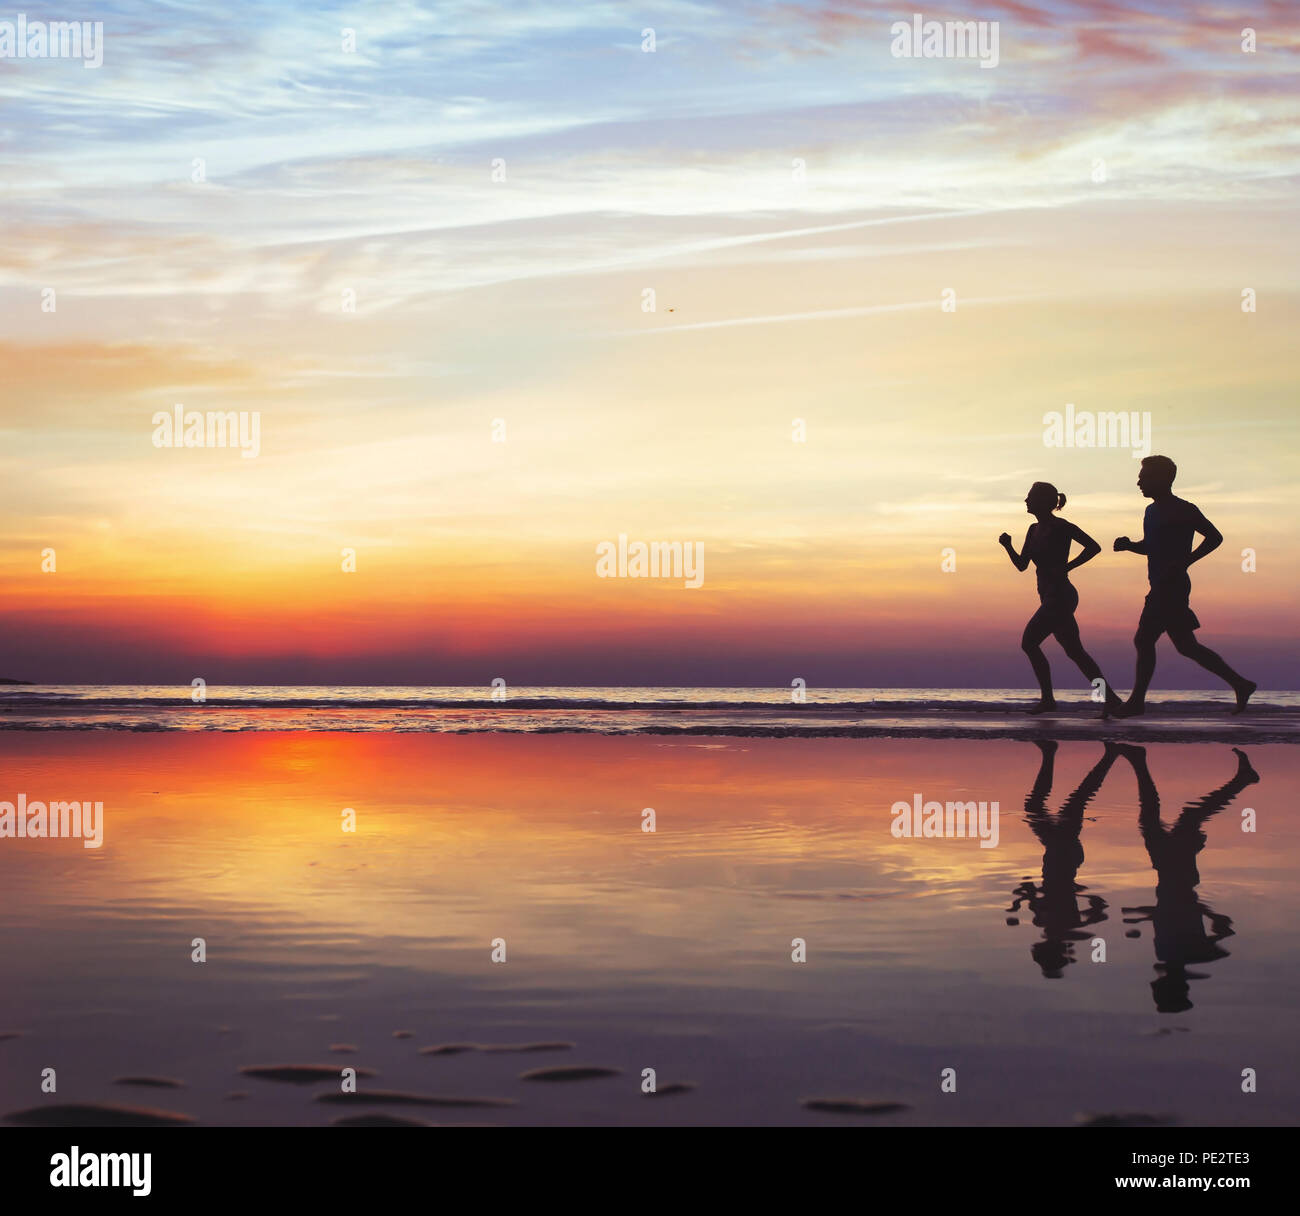 sport and health, two runners on the beach, silhouette of people jogging at sunset, man and woman healthy lifestyle Stock Photo